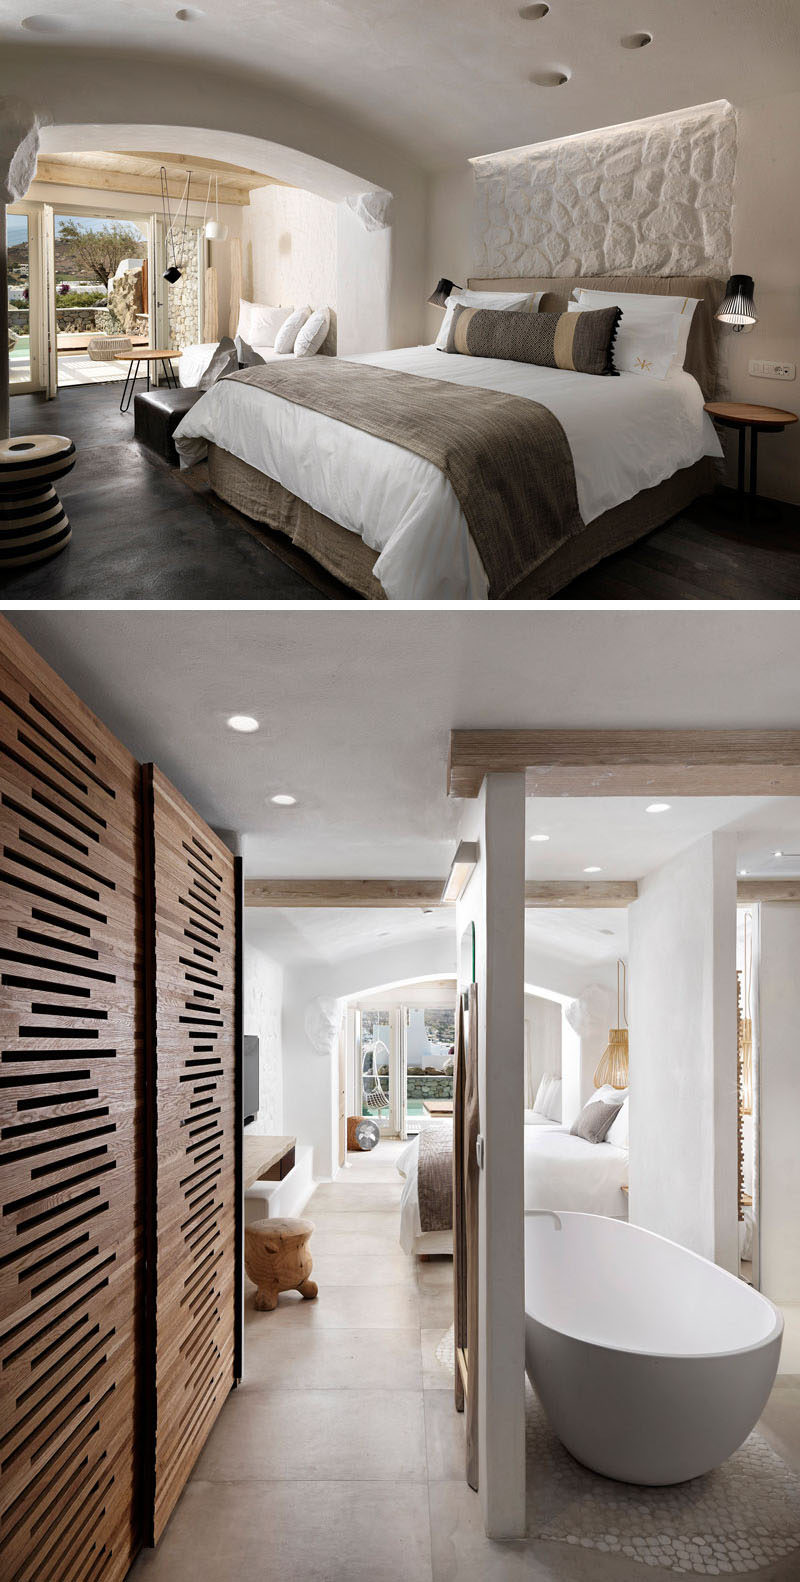 This contemporary hotel room has natural stone and aged wood featured throughout.